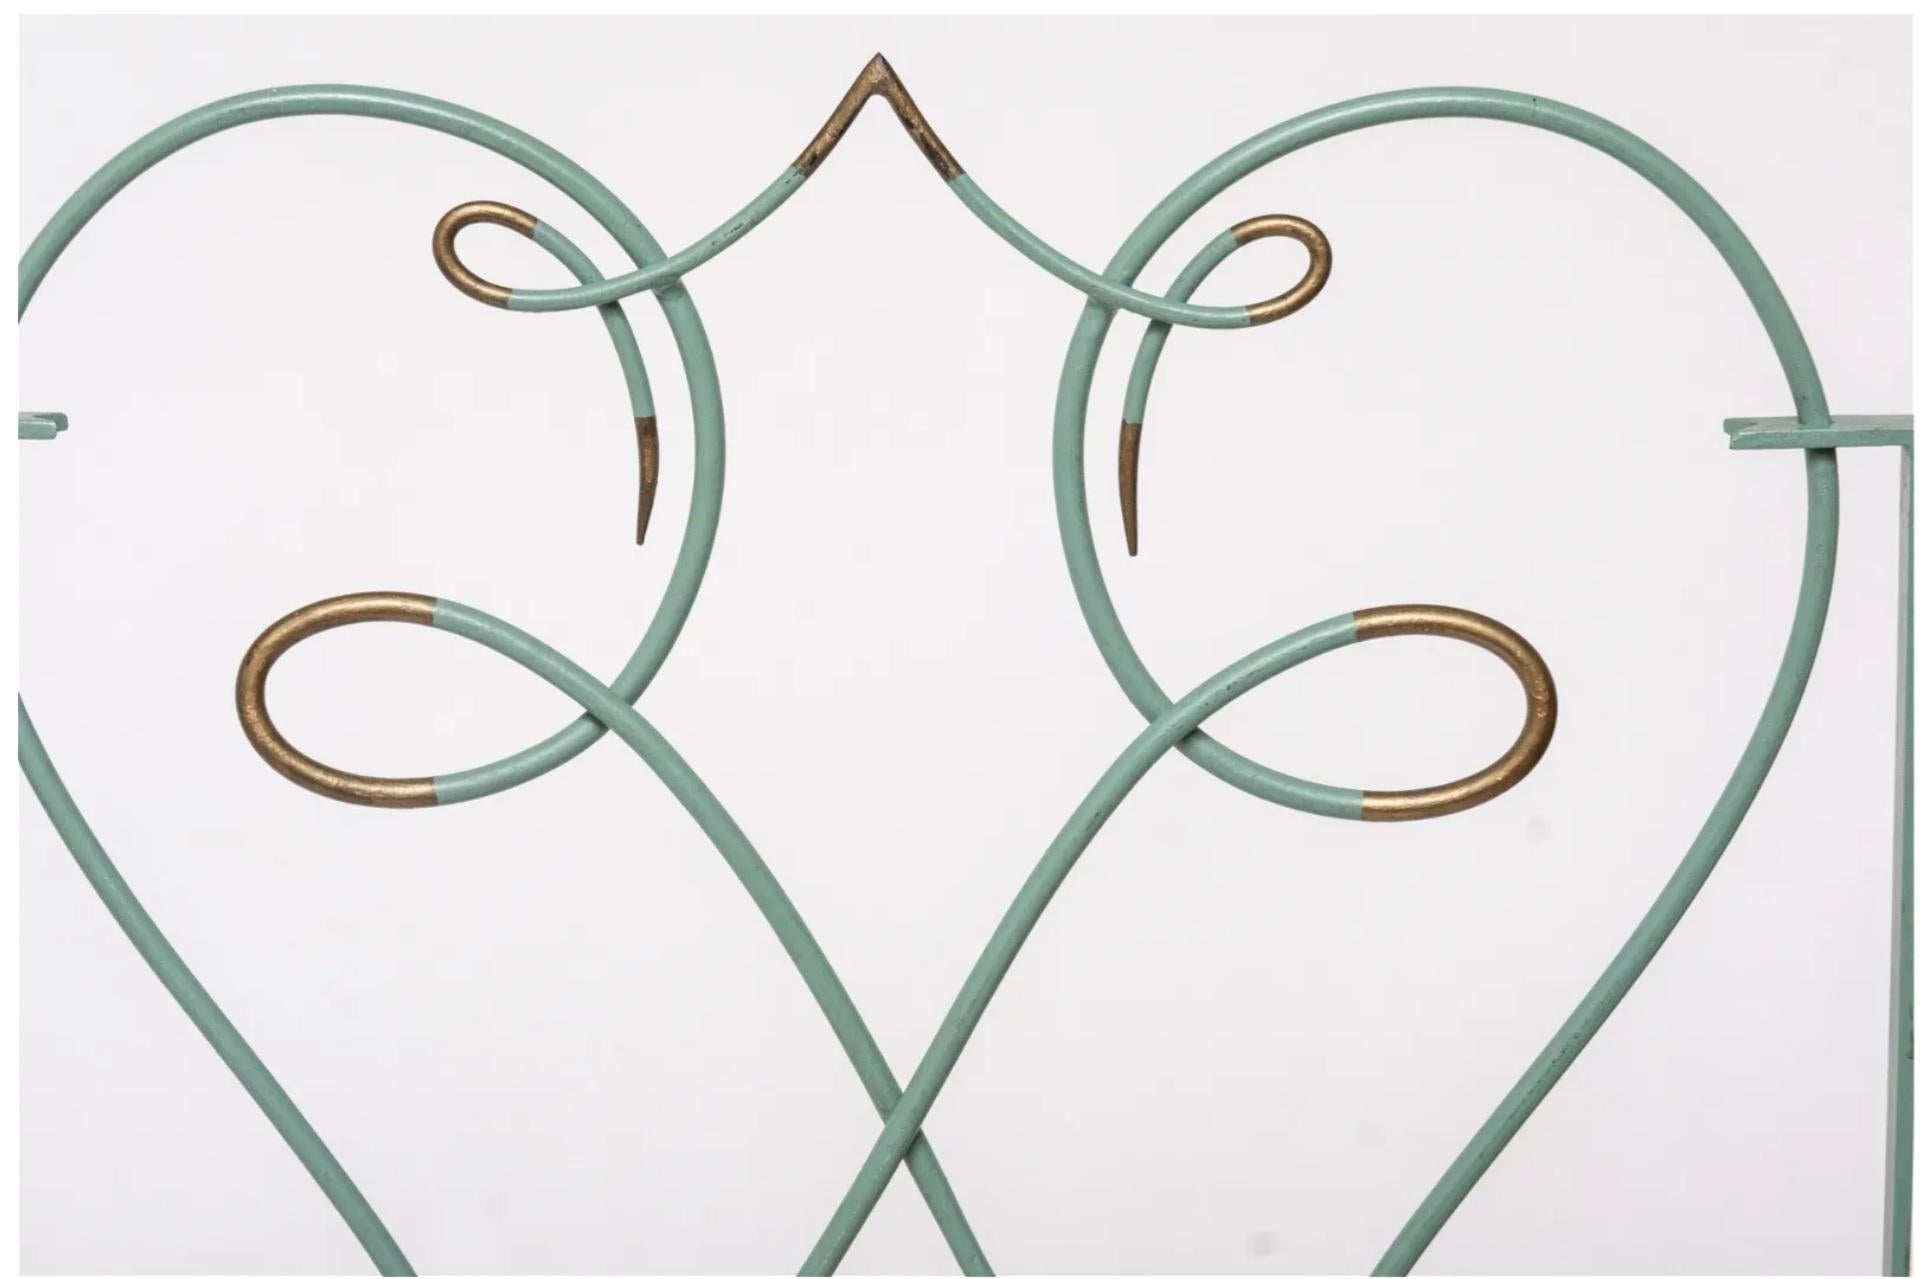 A pair of 1940s French Art Deco style wrought iron fire screens, attributed to Gilbert Poillerat. Sage green paint with gilt accents. These are meant to be used together as a set. 